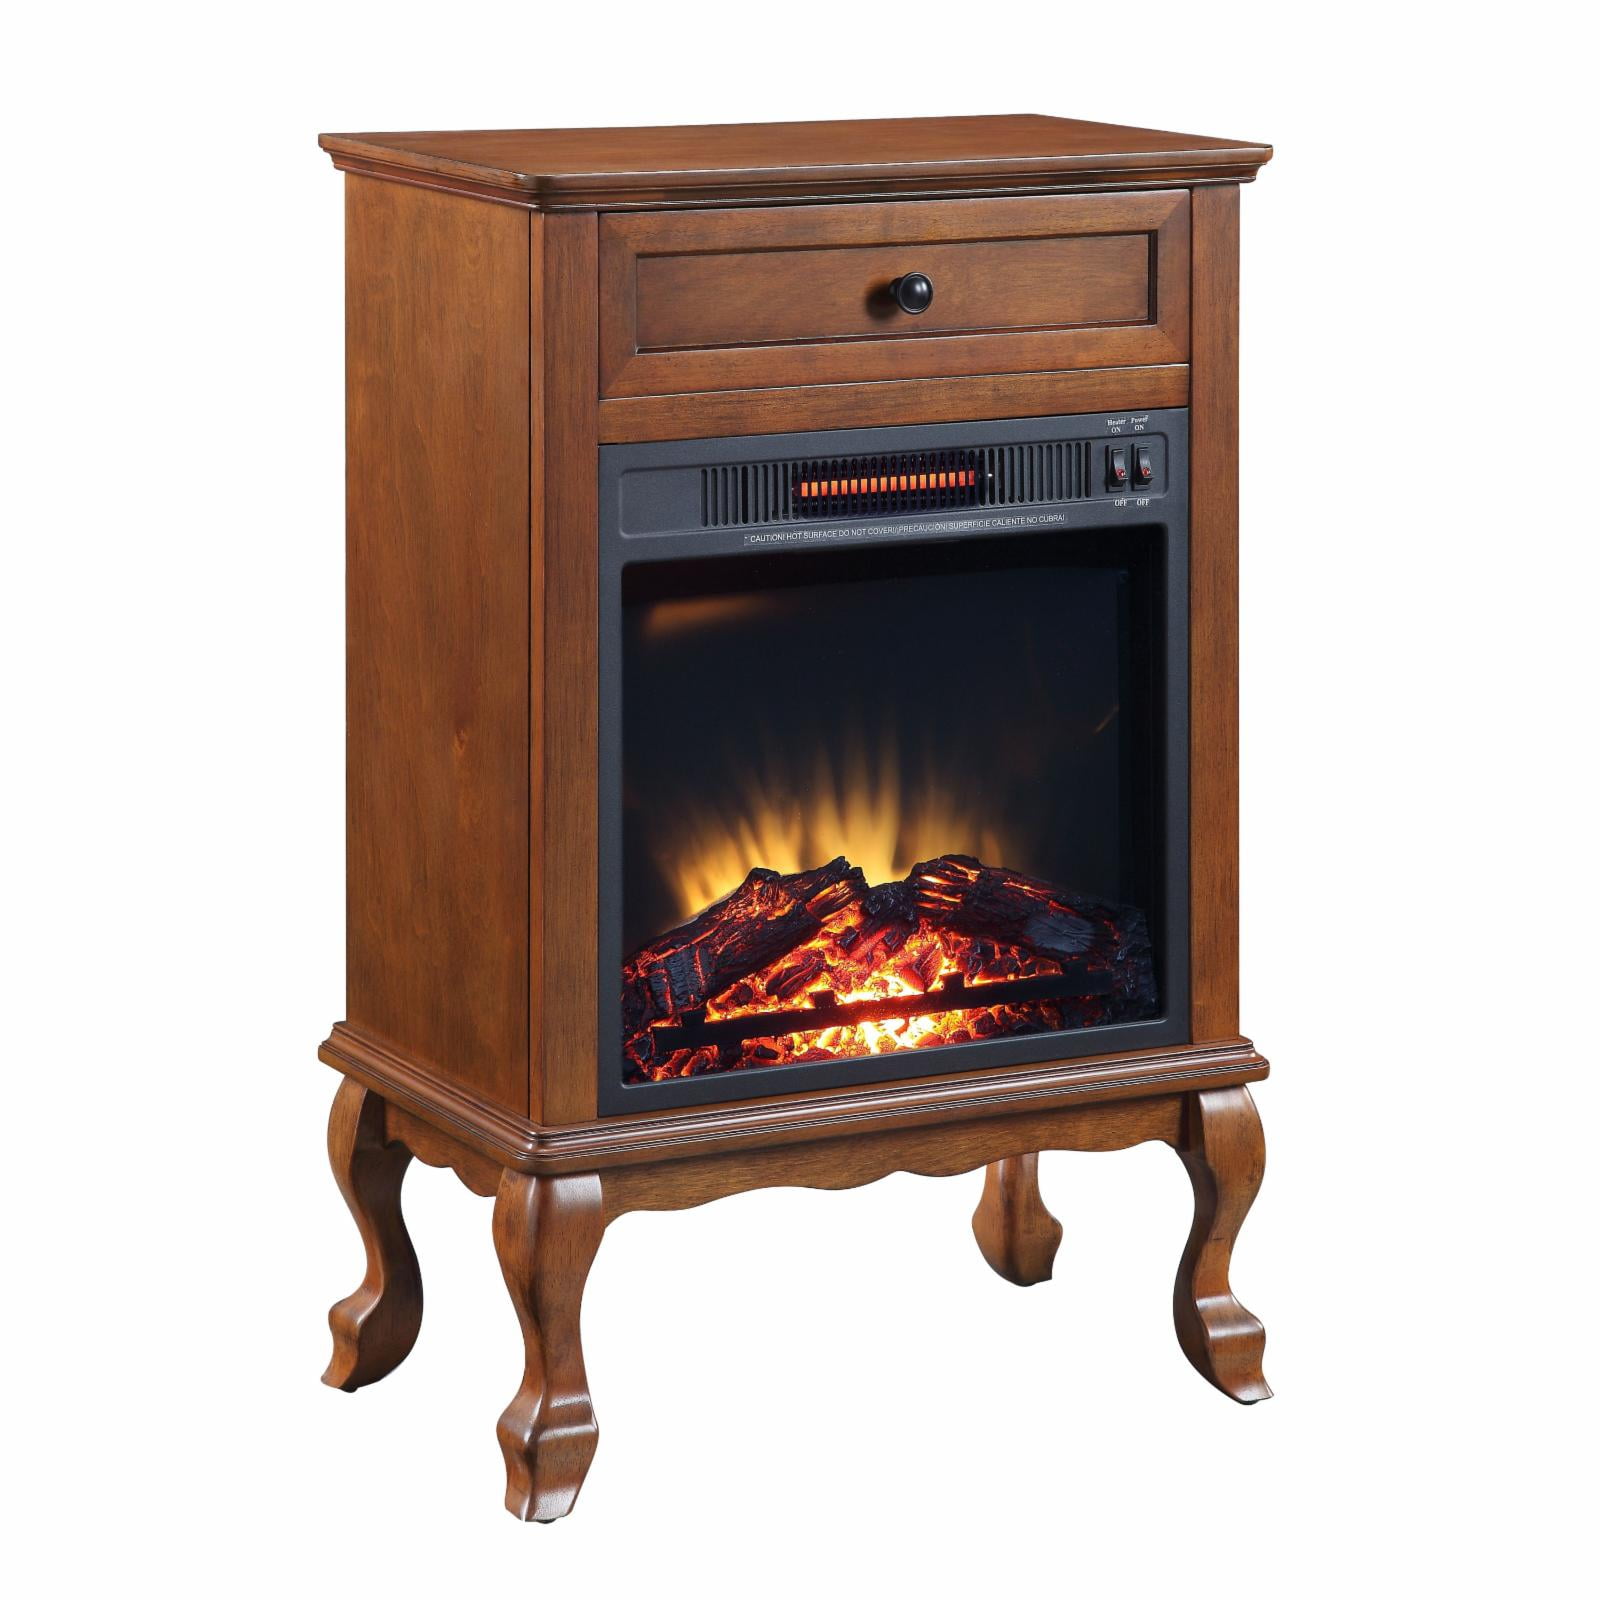 Picture of Acme Furniture AC00855 23 x 13 x 34 in. Eirene Fireplace, Walnut